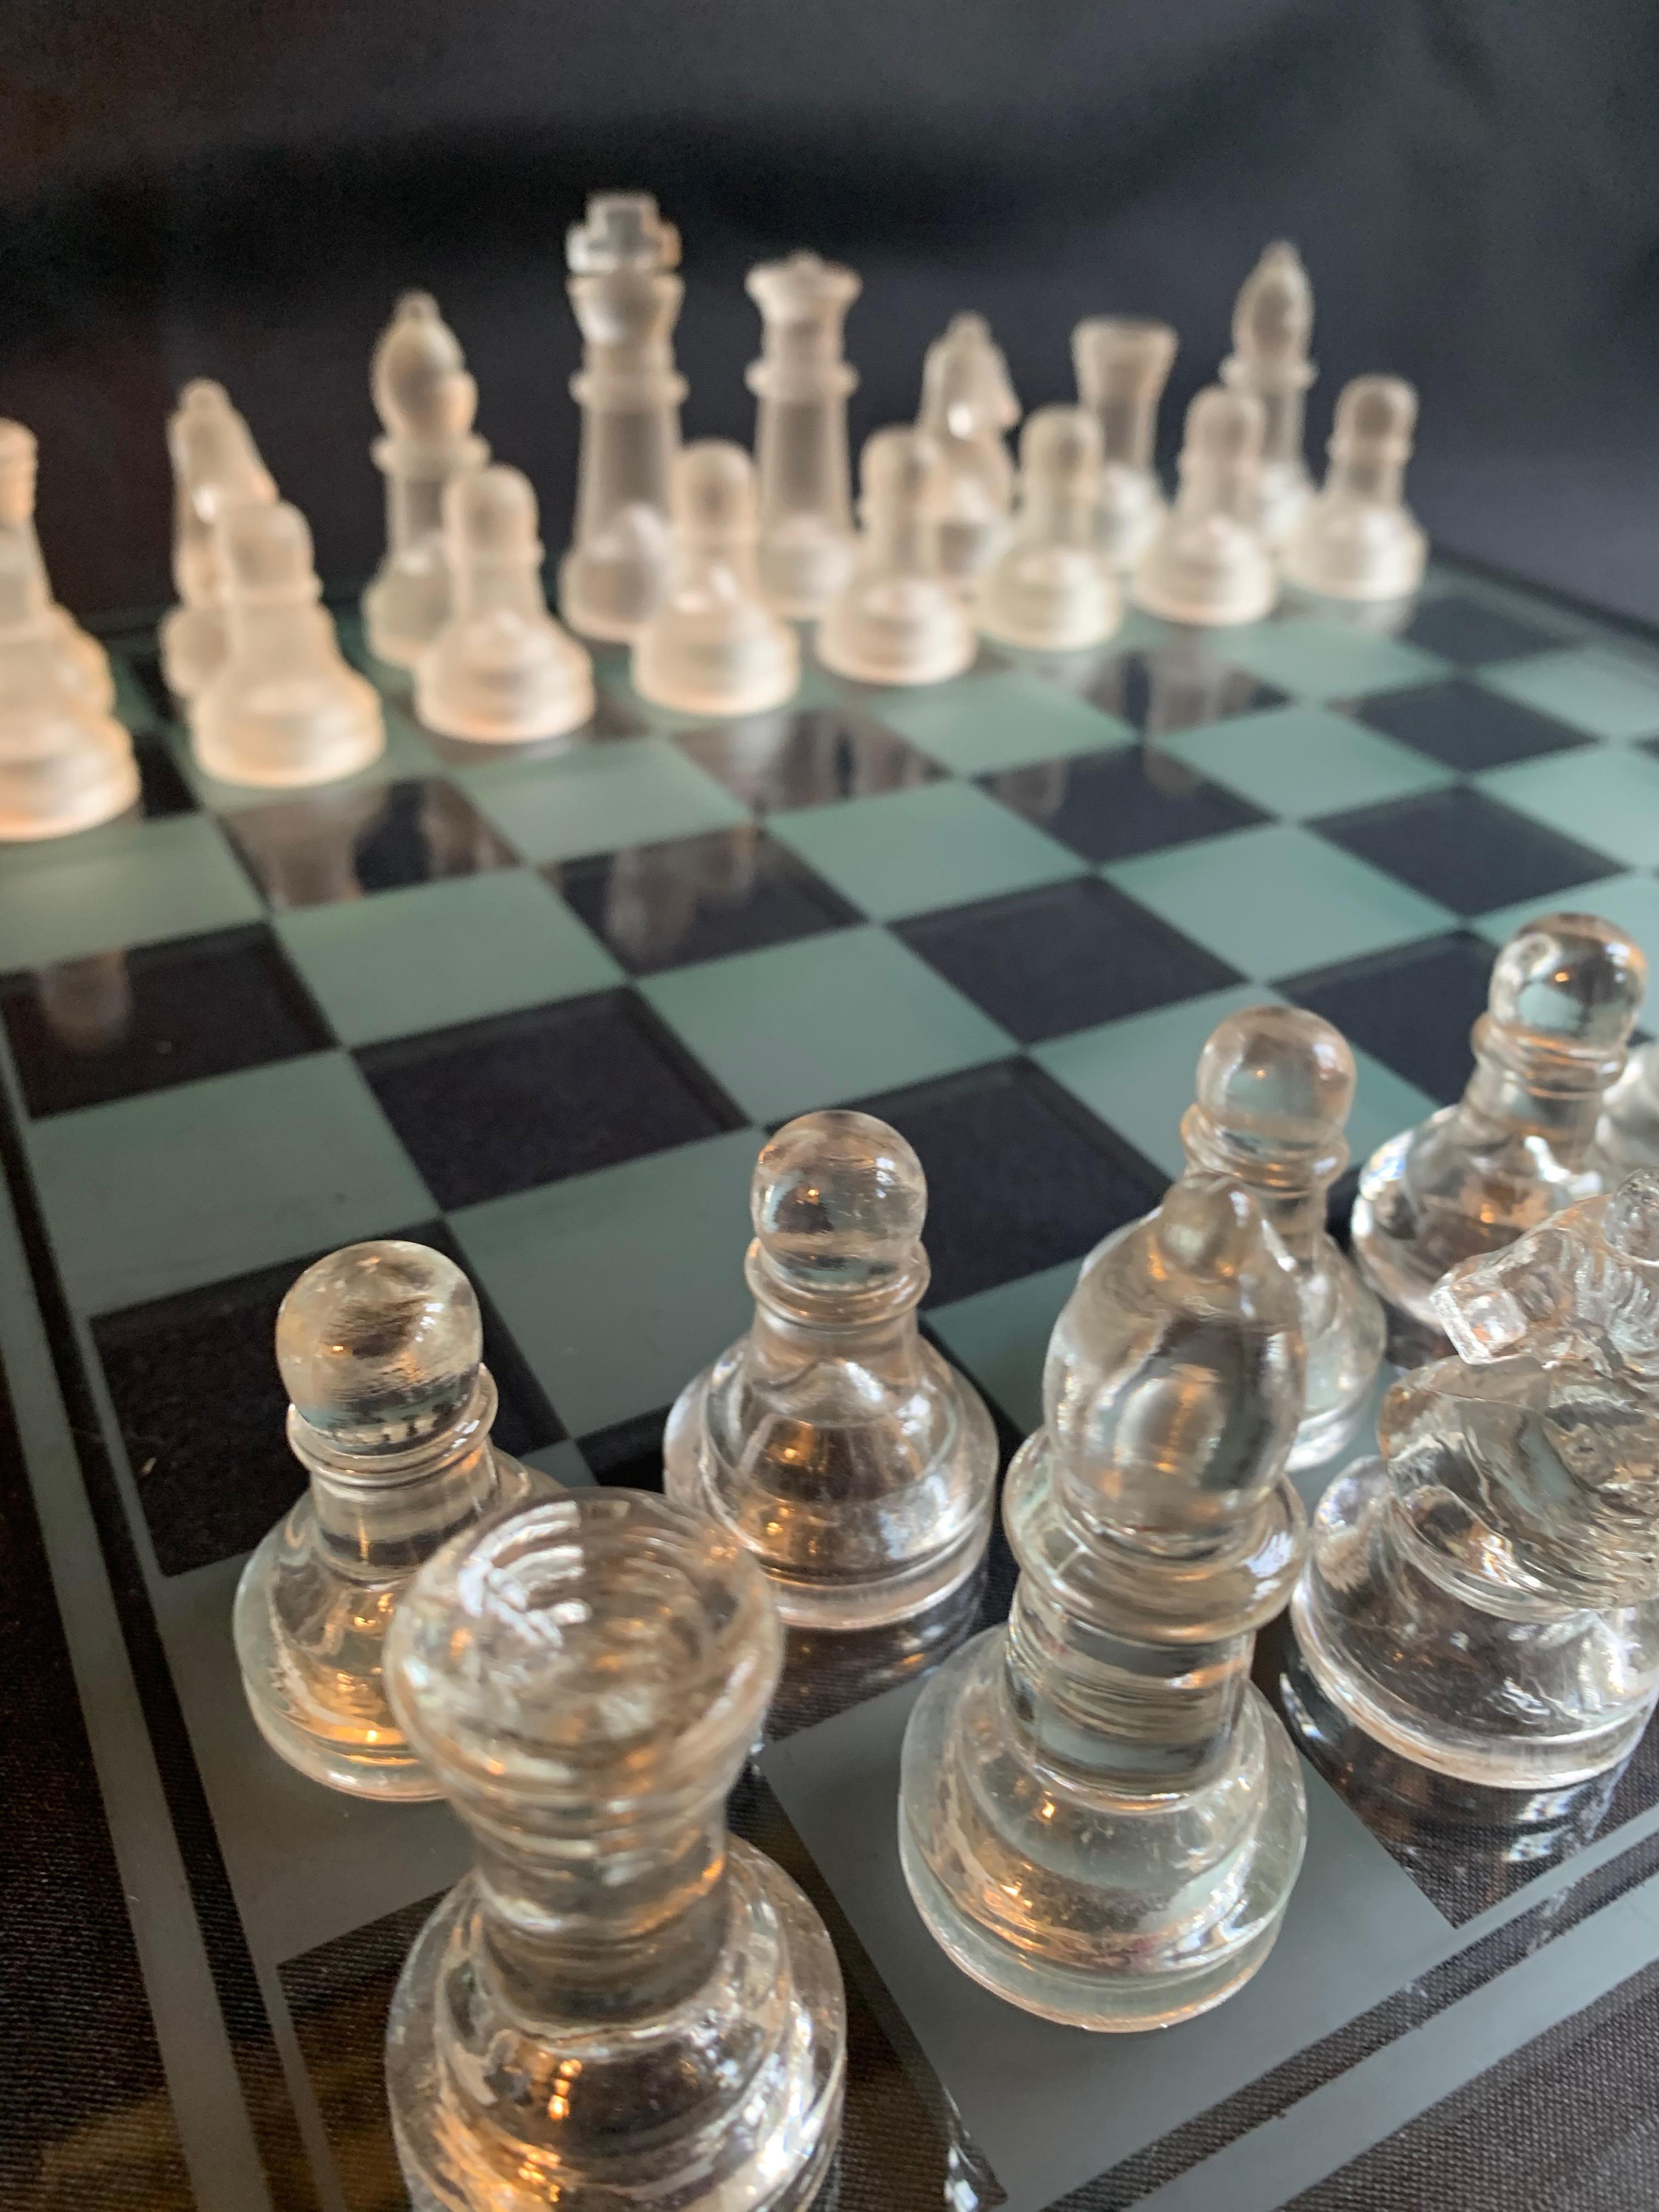 A wonderful glass chess set, a wonderful addition to the game room. Glass is in very good condition and doesn't look to be molded (no mold lines). The piece sparkles in the right light and is impressive as a decorative piece

For size of board see